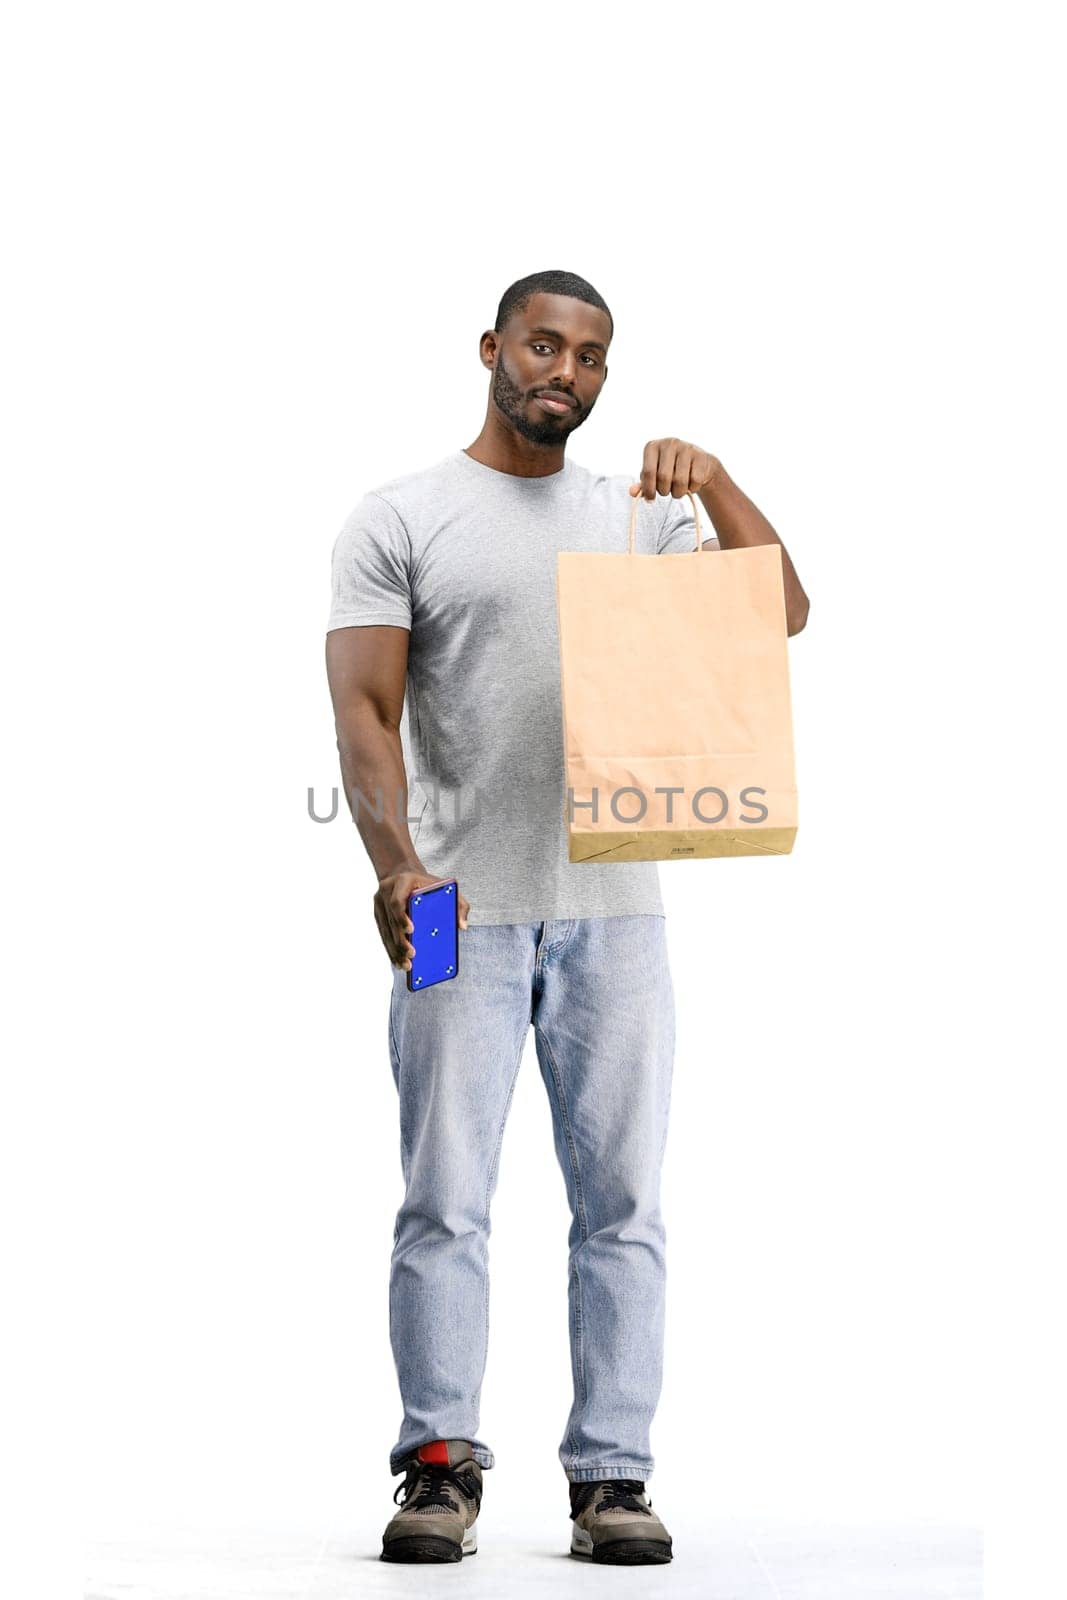 A man, full-length, on a white background, with bags and a phone.